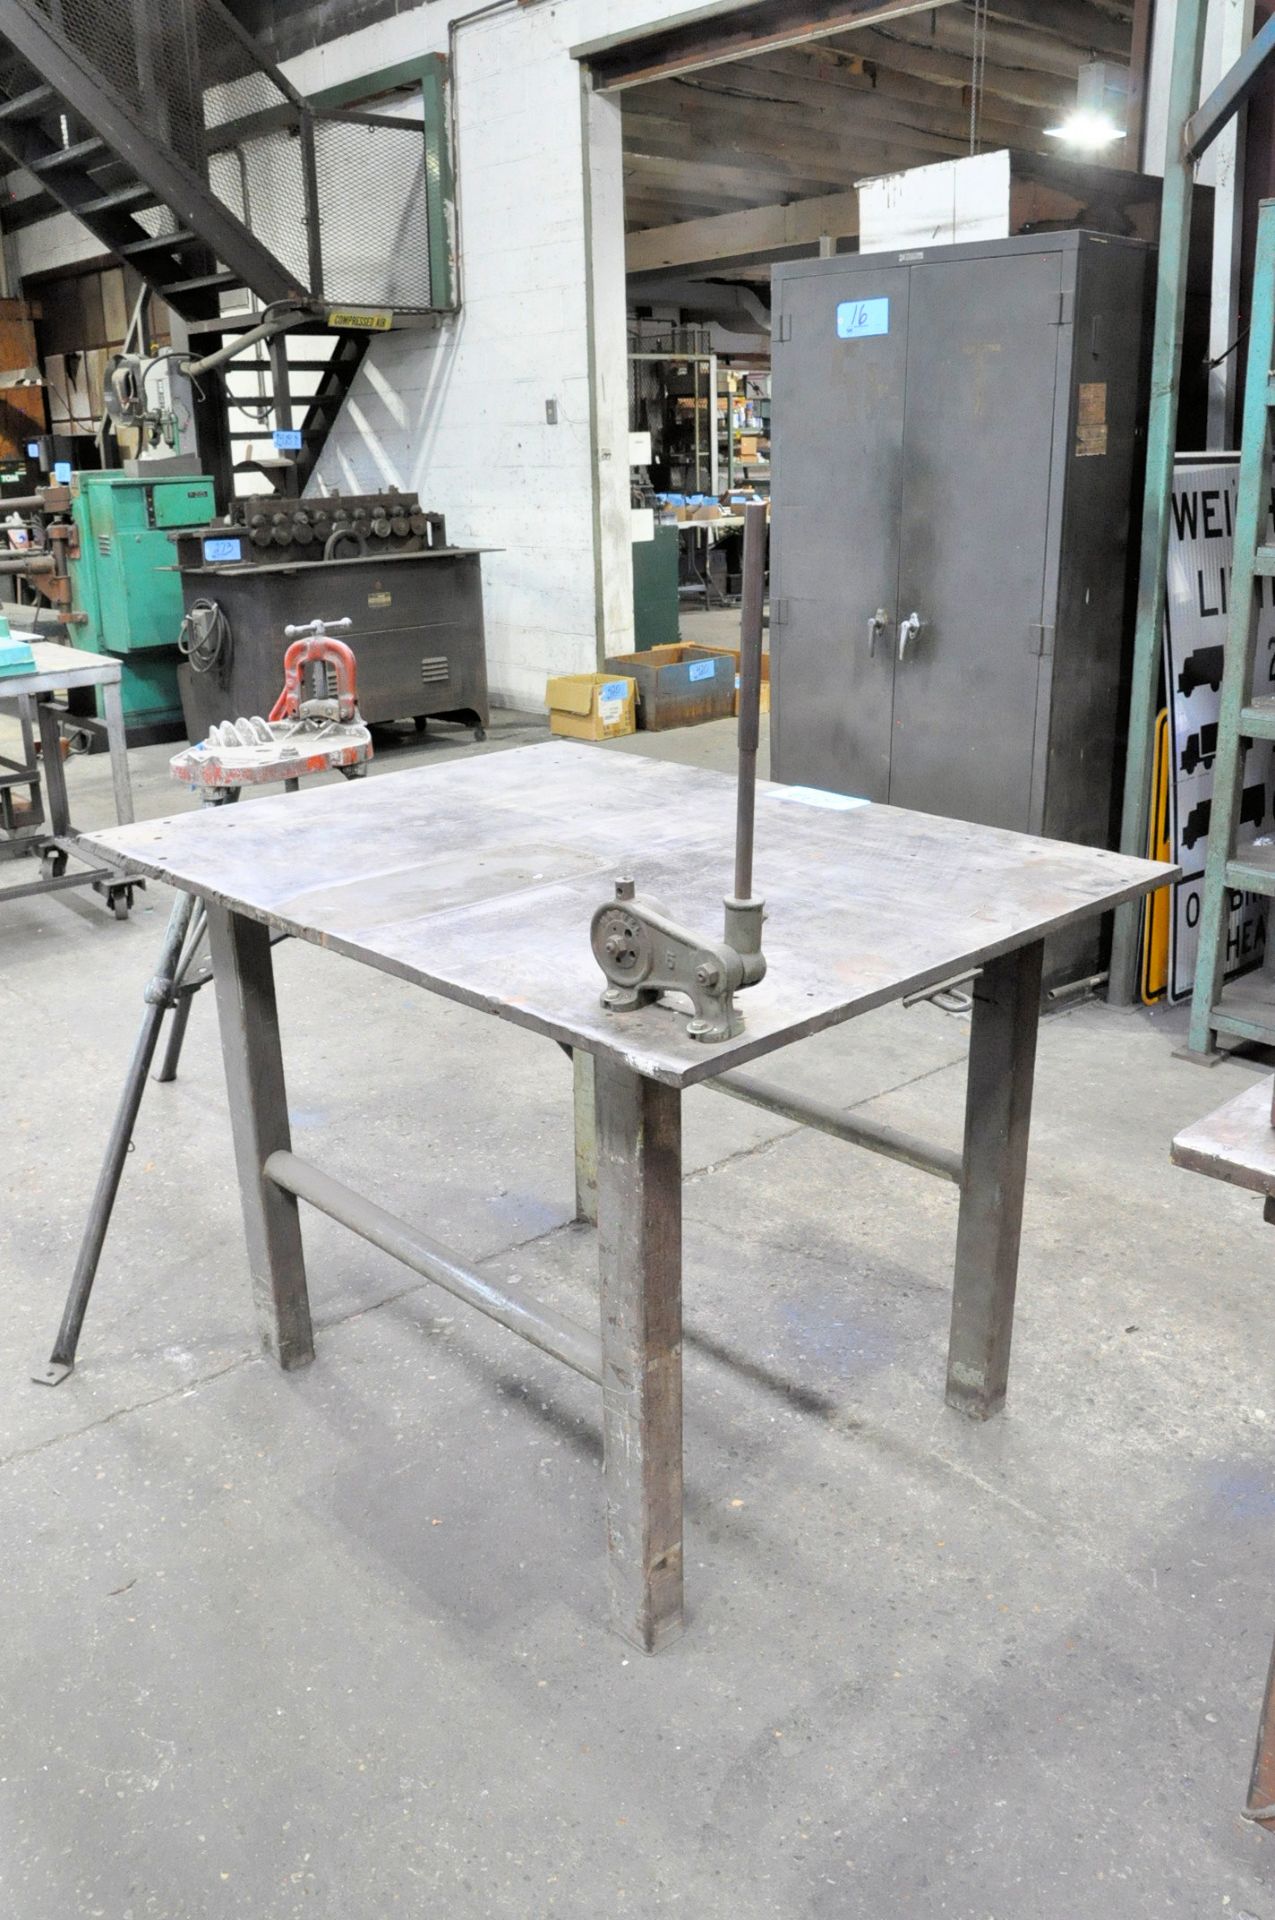 38" x 49" x 5/8" Steel Layout Table with Marvel No. 5 Punch